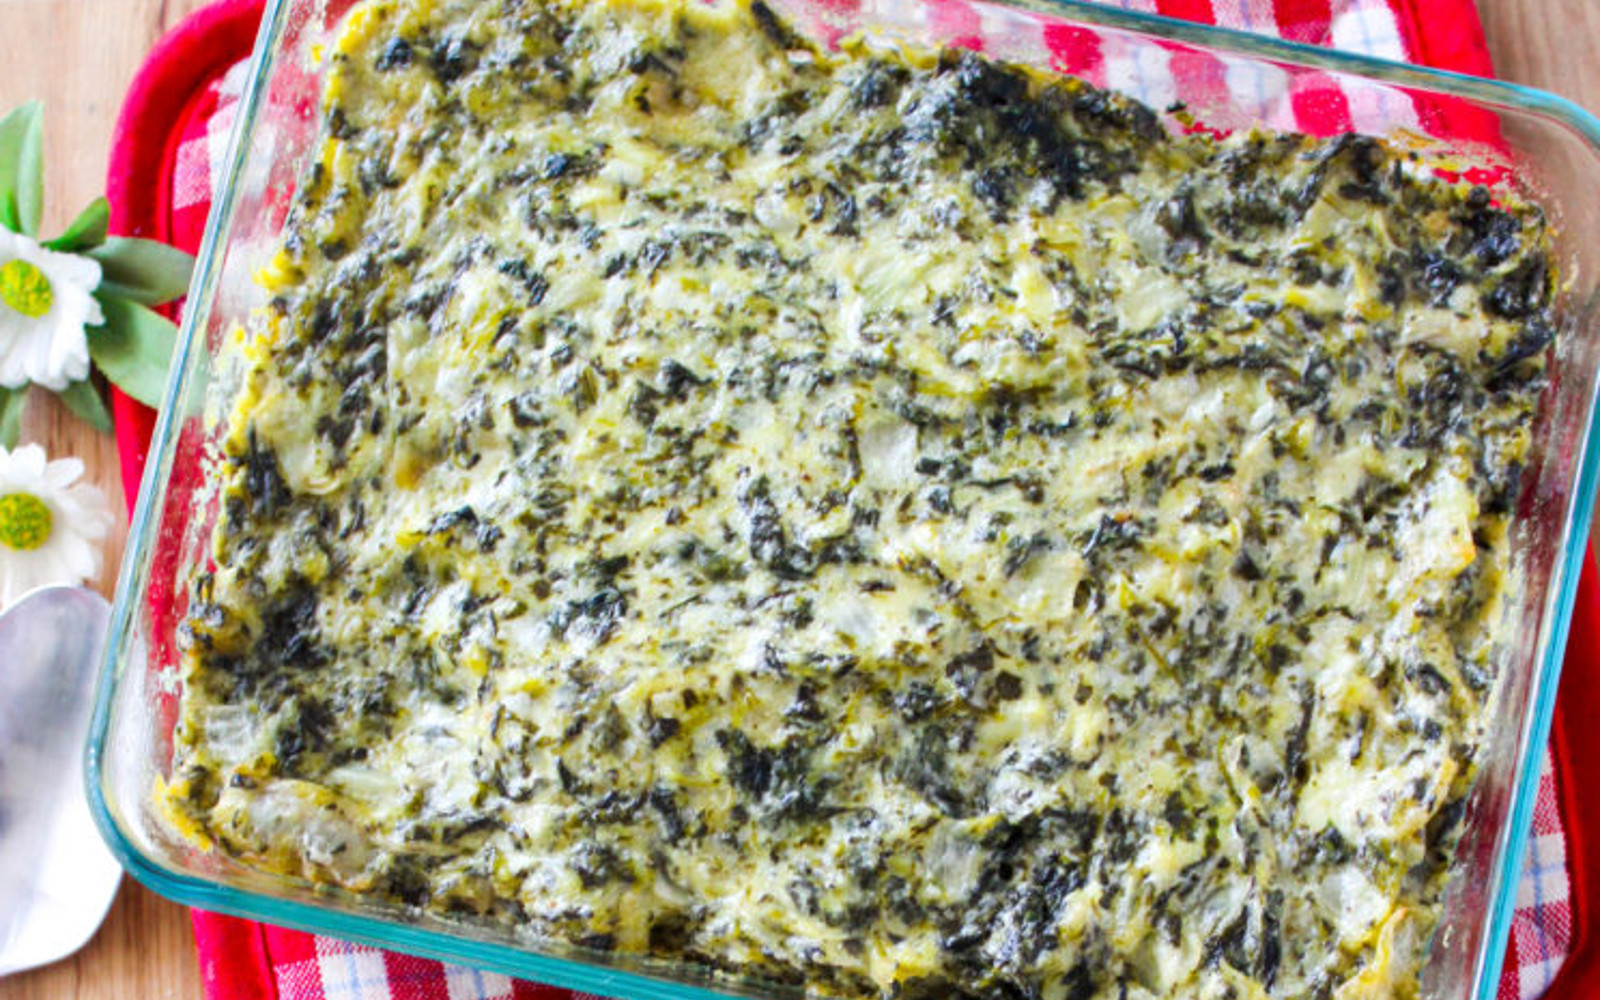 Vegan Easy Spinach and Artichoke Dip with carrots and chips